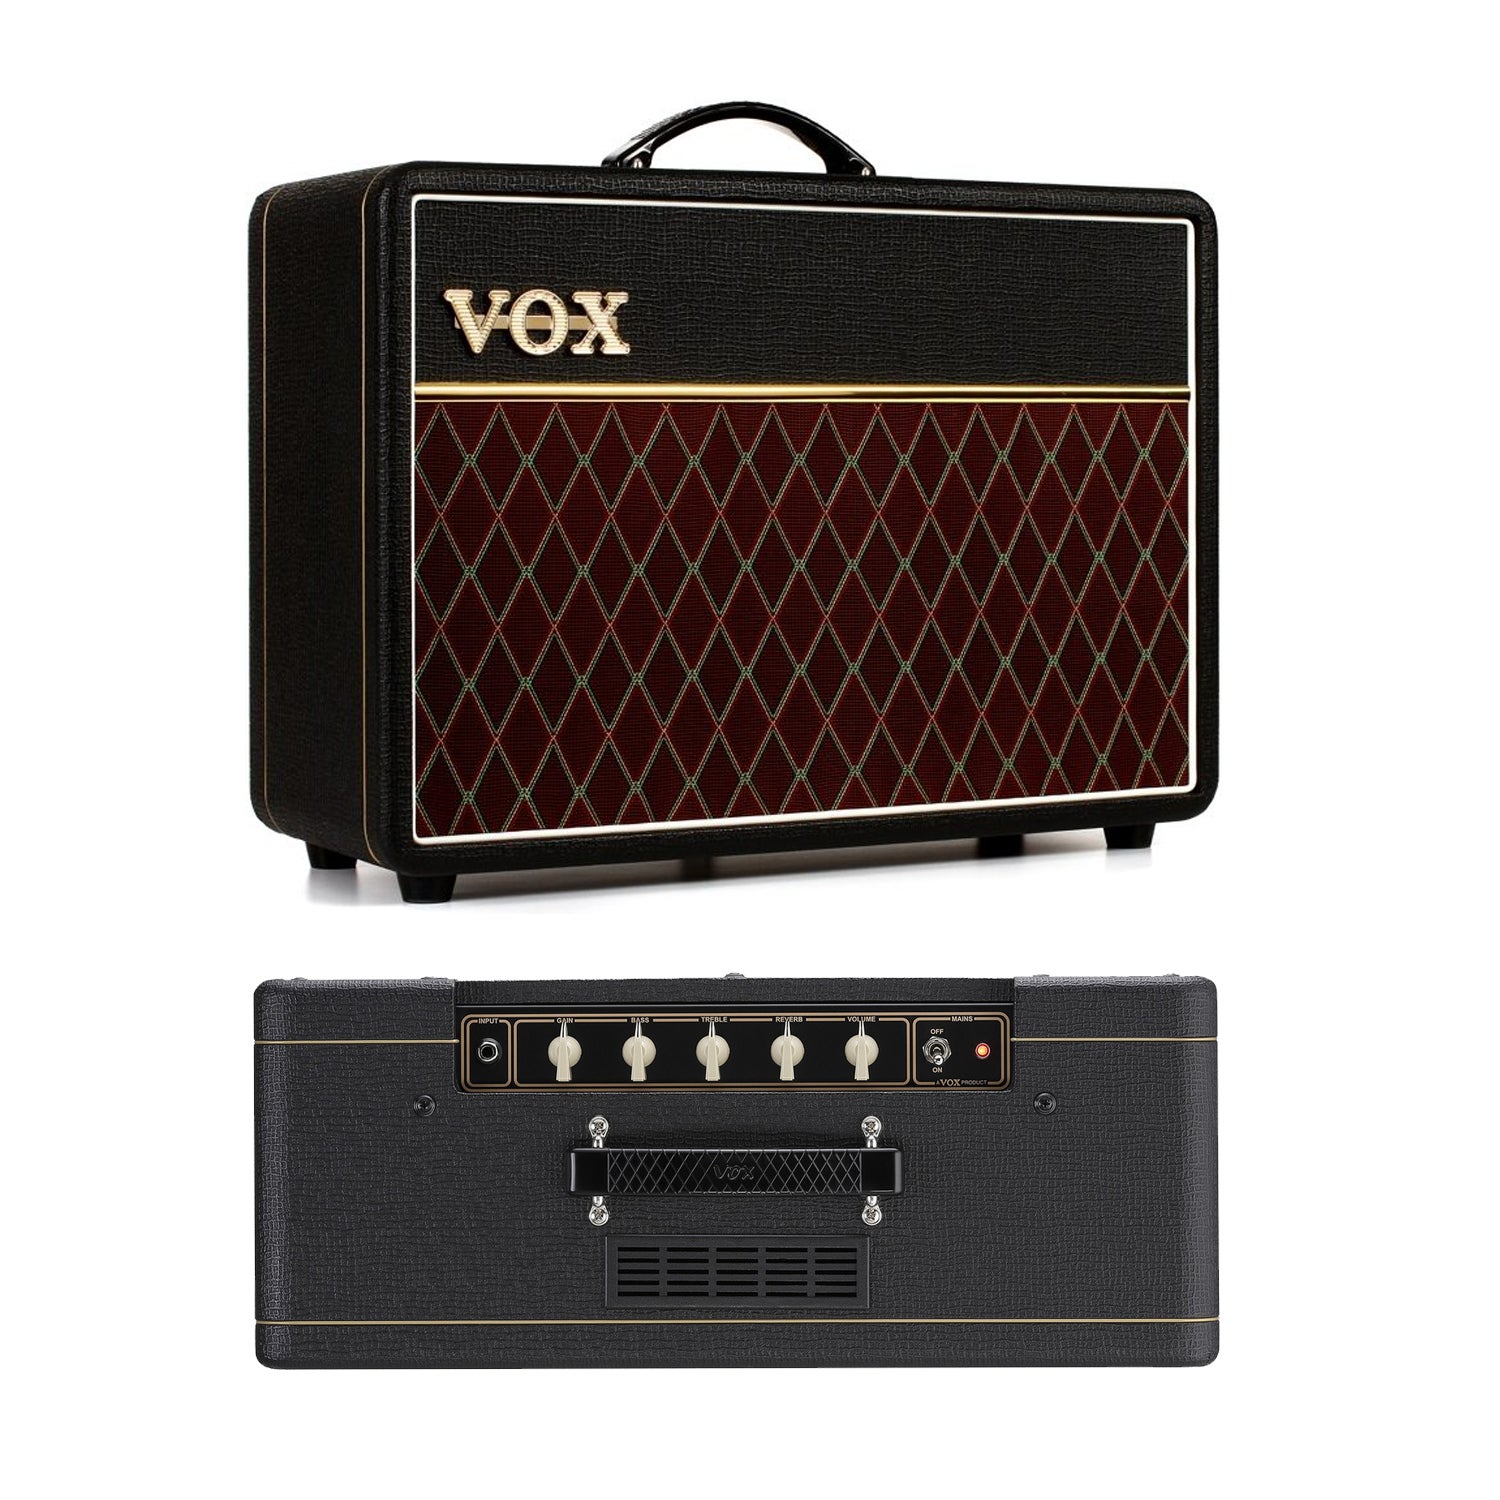 Vox Ac10 C1 Electric Guitar Tube Amplifier 1 X 10 | Music Works